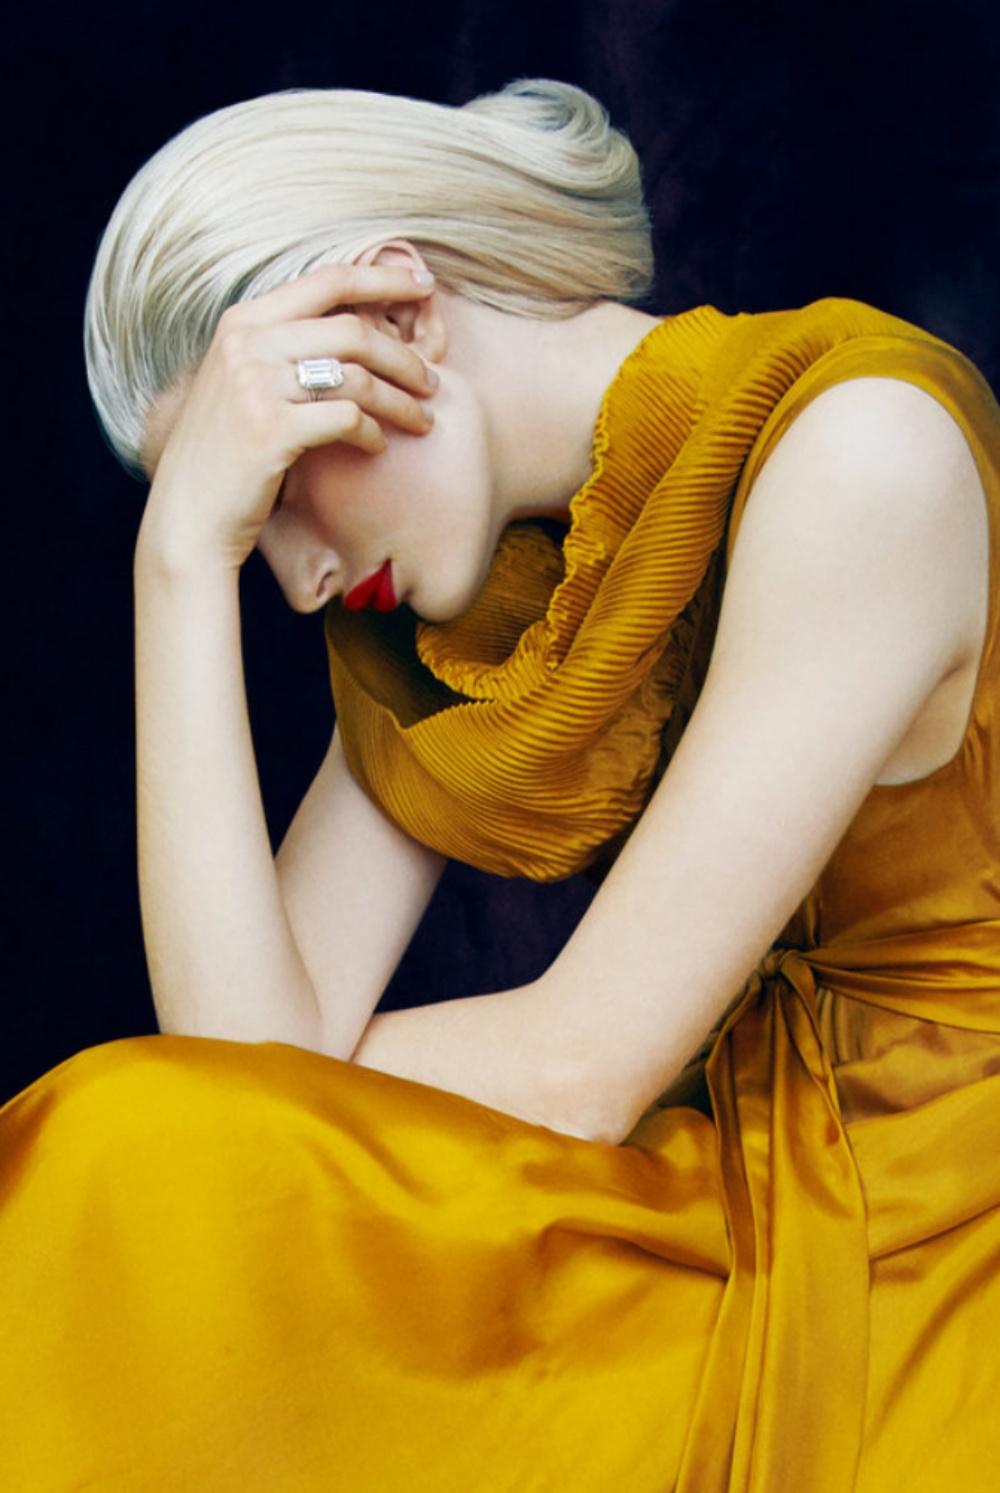 Erik MADIGAN HECK (*1983, United States)
Gold, Sotheby's, 2017
Chromogenic print
Sheet 101.6 x 72.4 cm (40 x 28 1/2 in.)
Edition of 5, plus 2 AP; Ed. no. 2/5
Print only


Originally from Excelsior, Minnesota, Erik Madigan Heck (*1983) is one of the